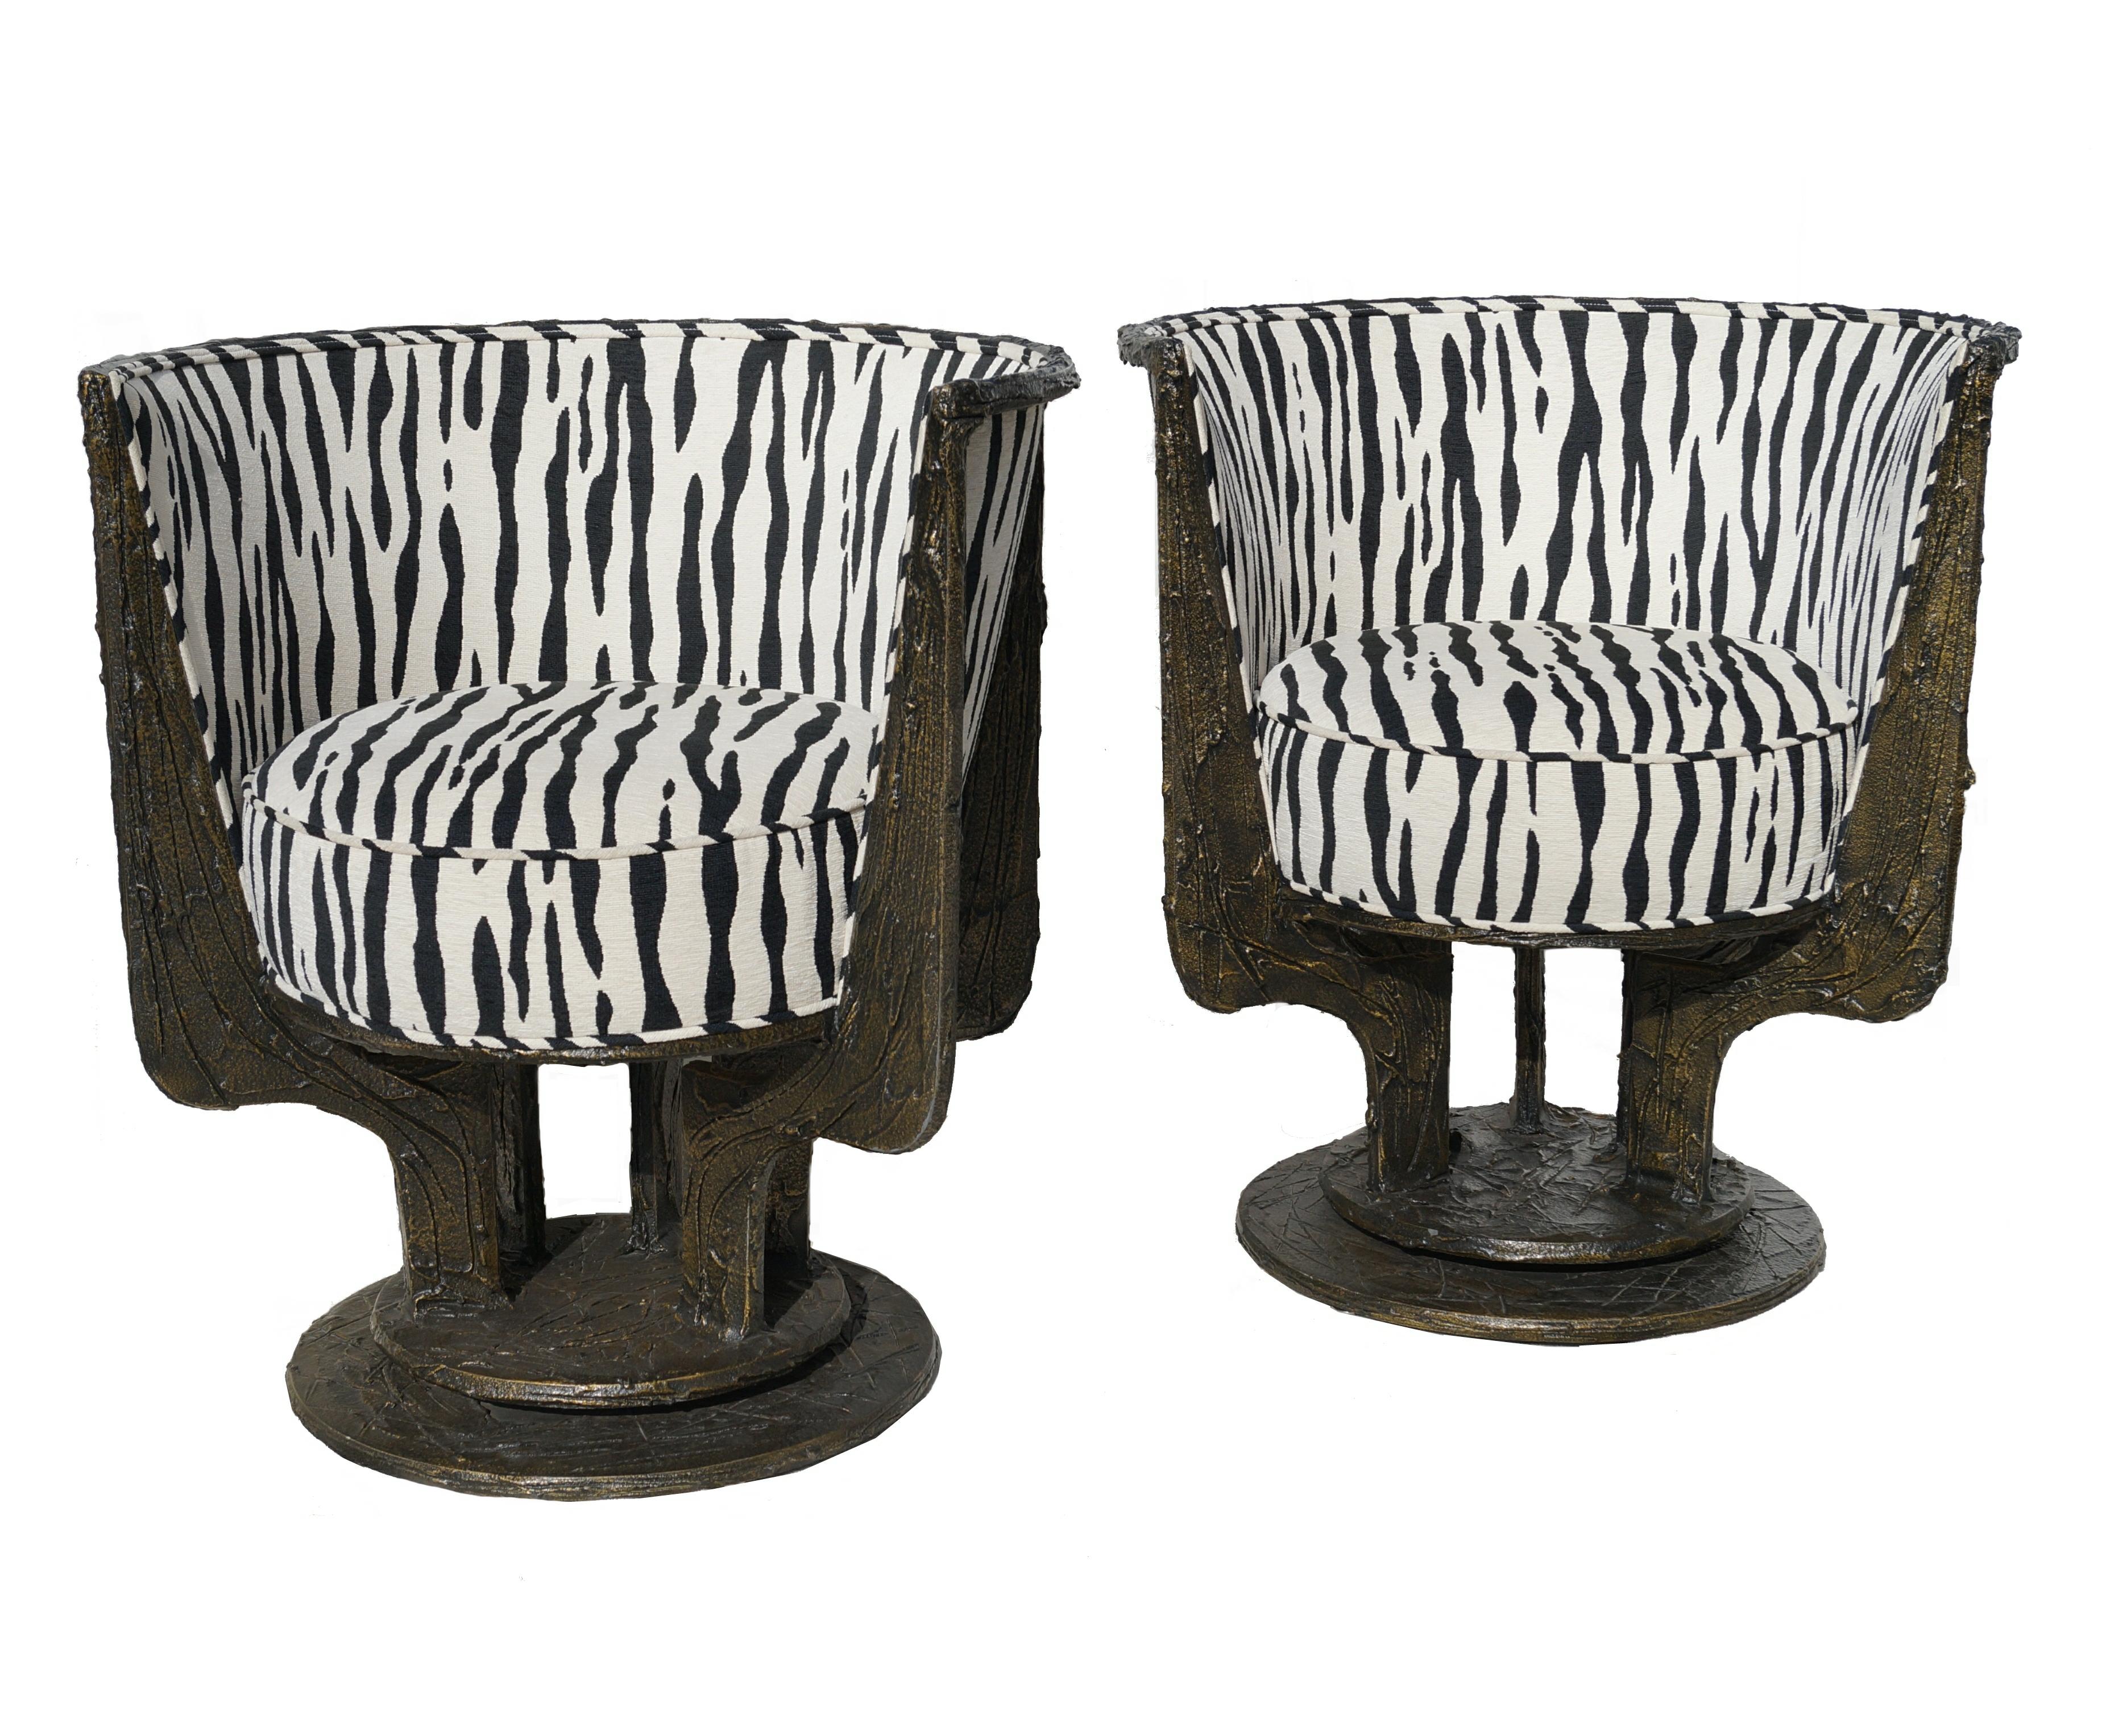 Pair of Paul Evans sculpted bronze chairs. 